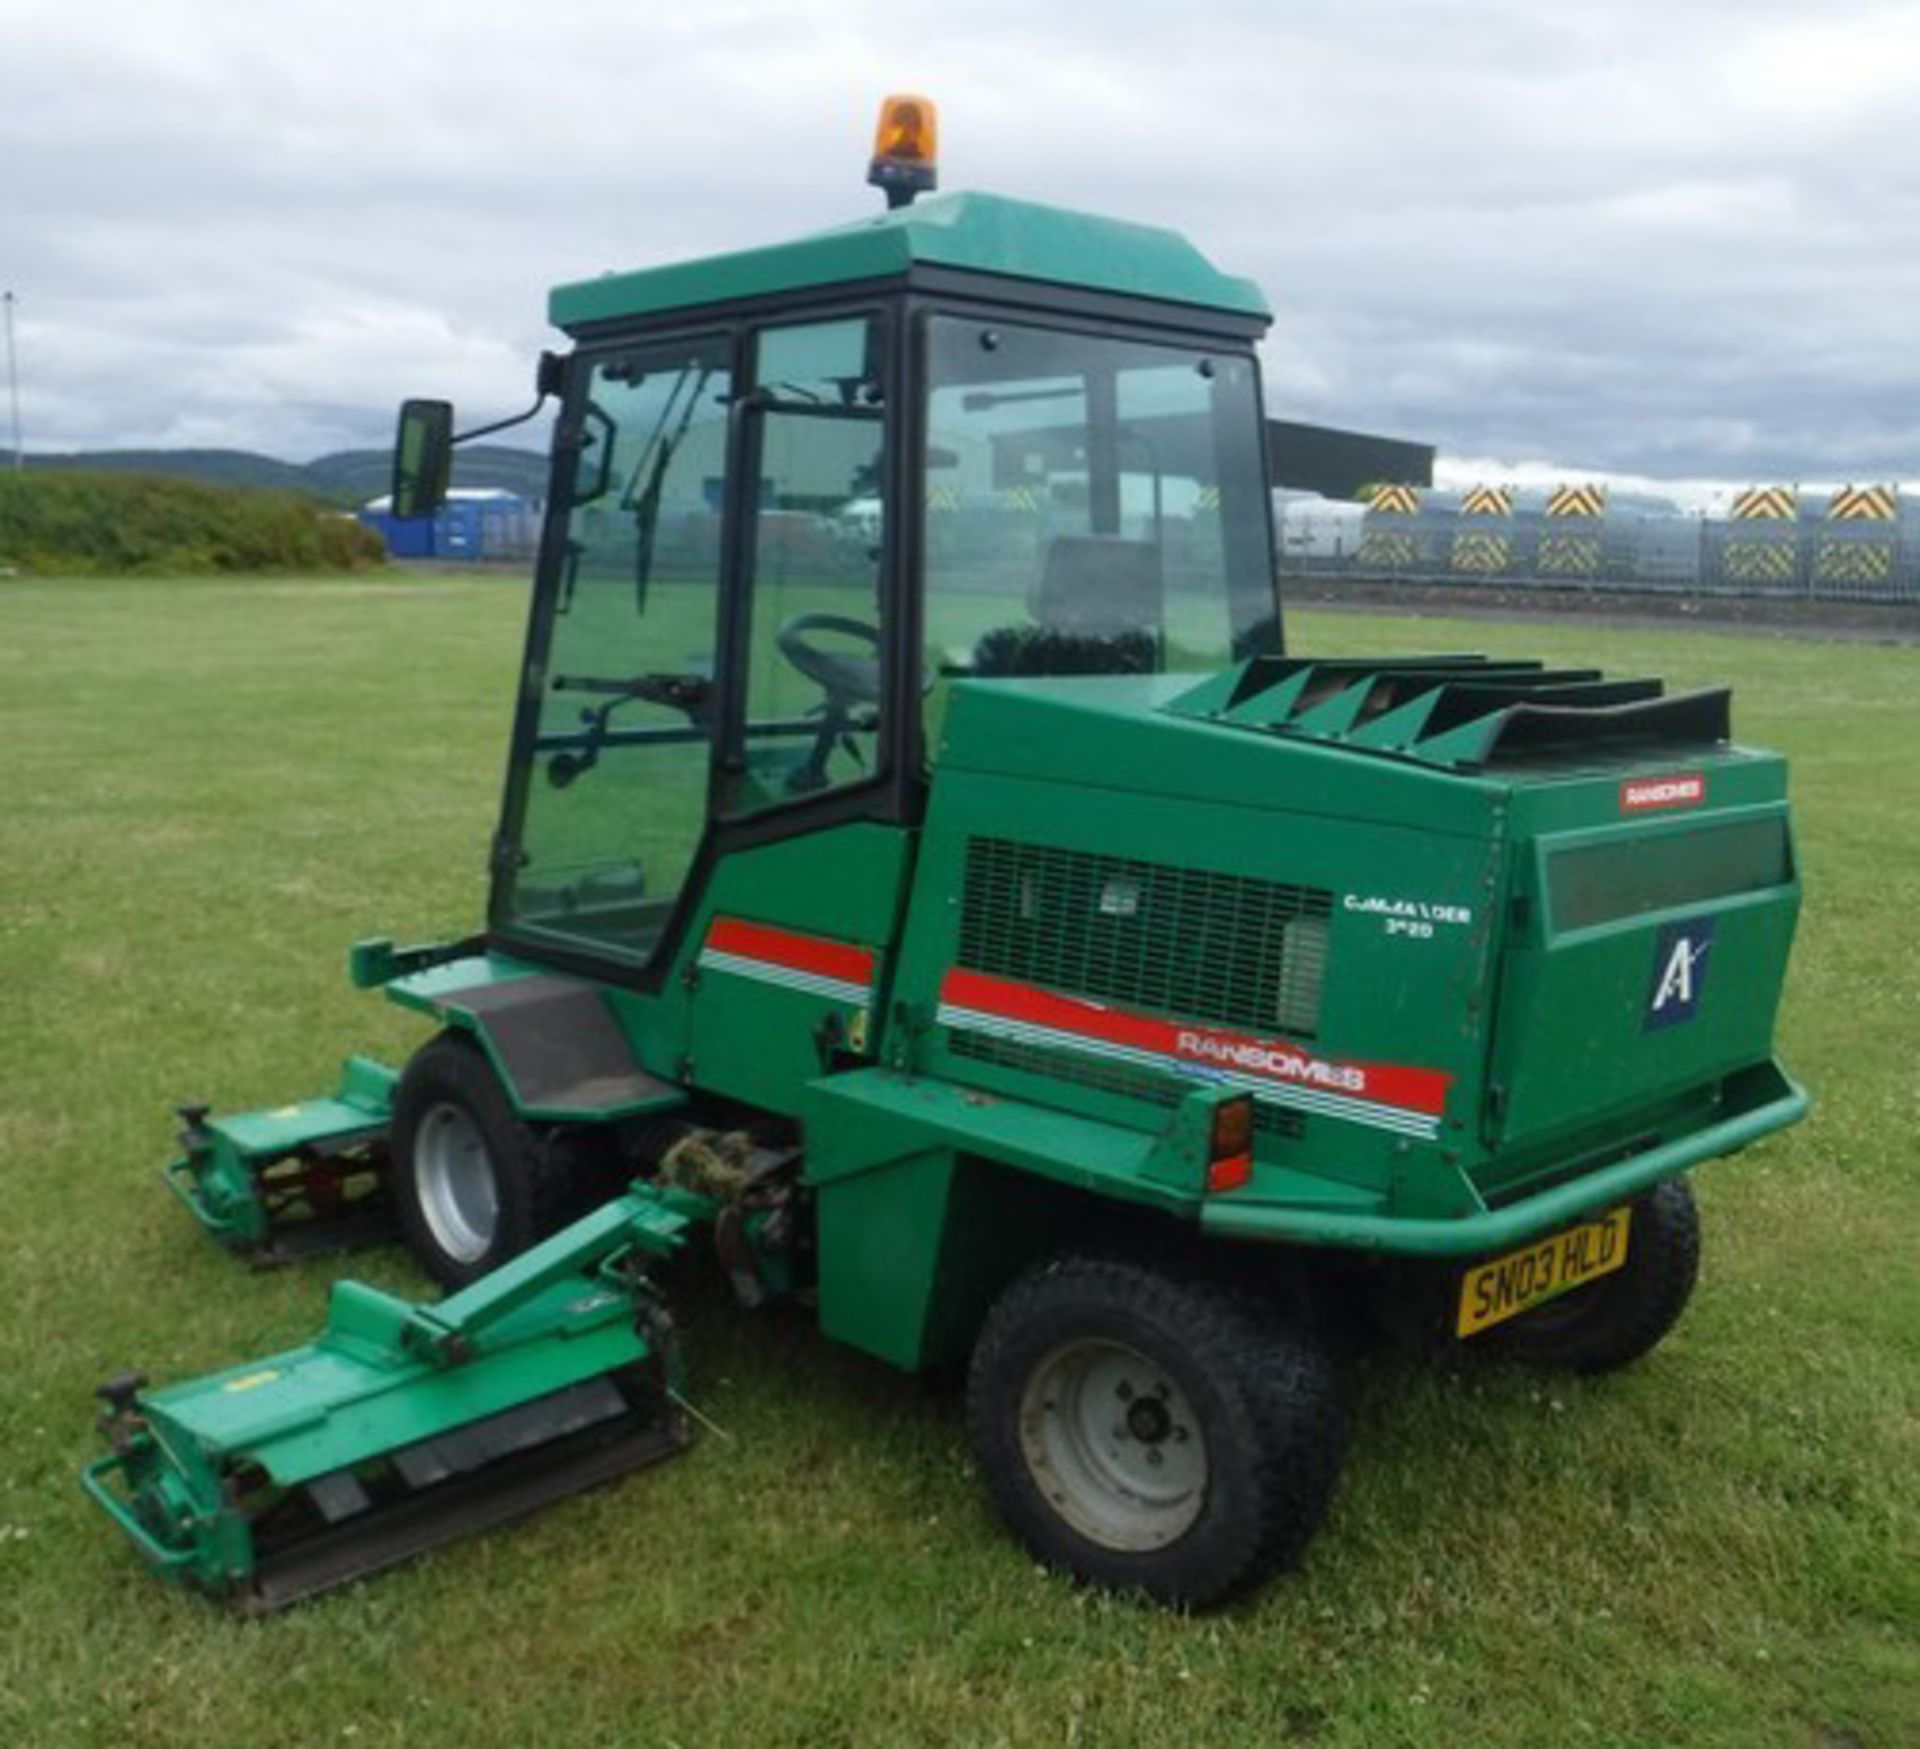 2003 RANSOMES 5 Gang ride on mower. Reg No SN03HLD. 4407hrs (correct) c/w Ransomes safety cab - Image 30 of 34